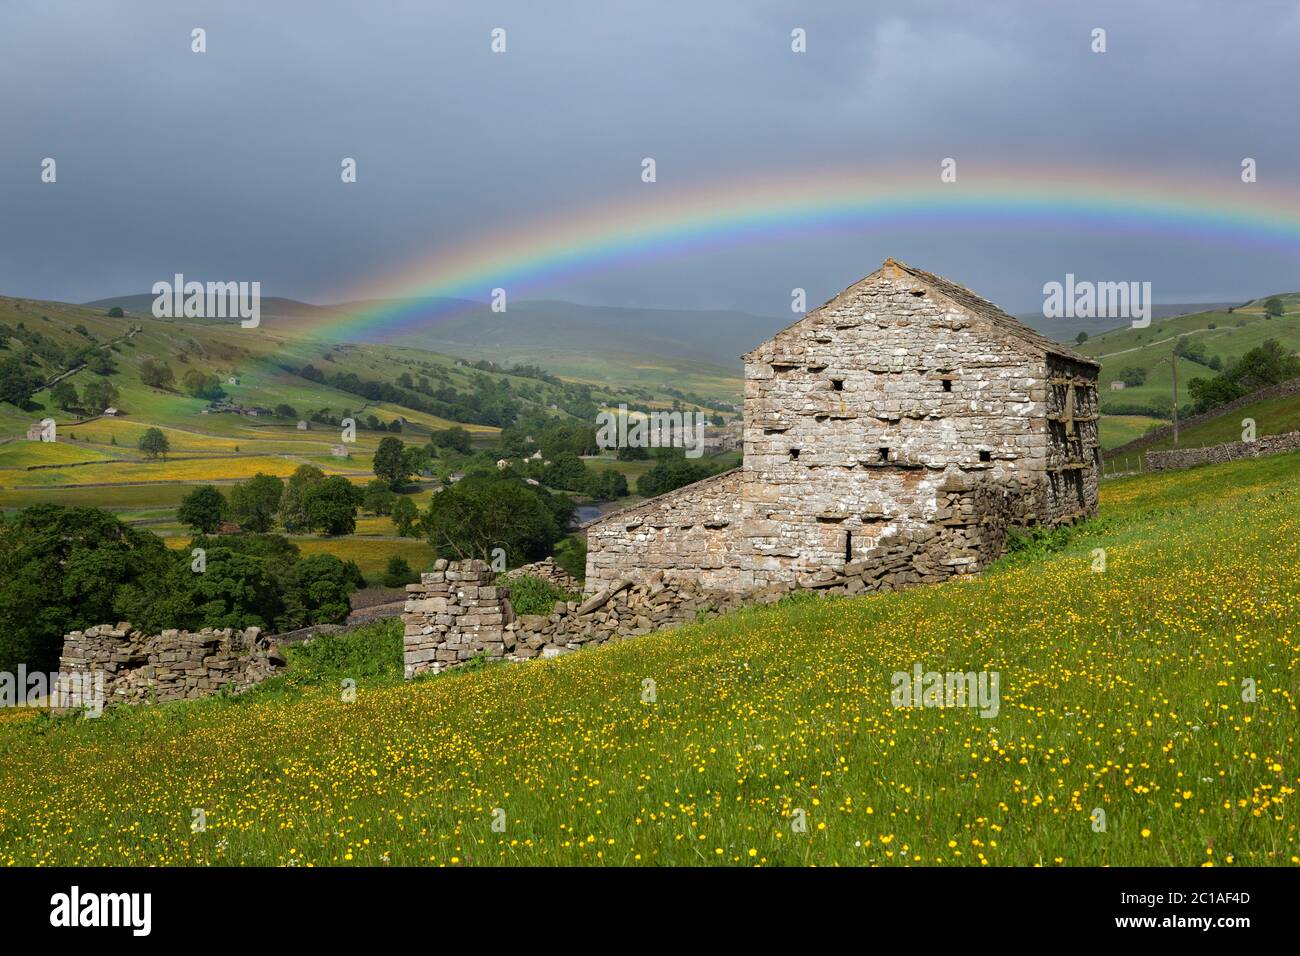 Rainbow over traditional stone barn in the Swaledale valley, Muker, Yorkshire Dales National Park, North Yorkshire, England, United Kingdom, Europe Stock Photo